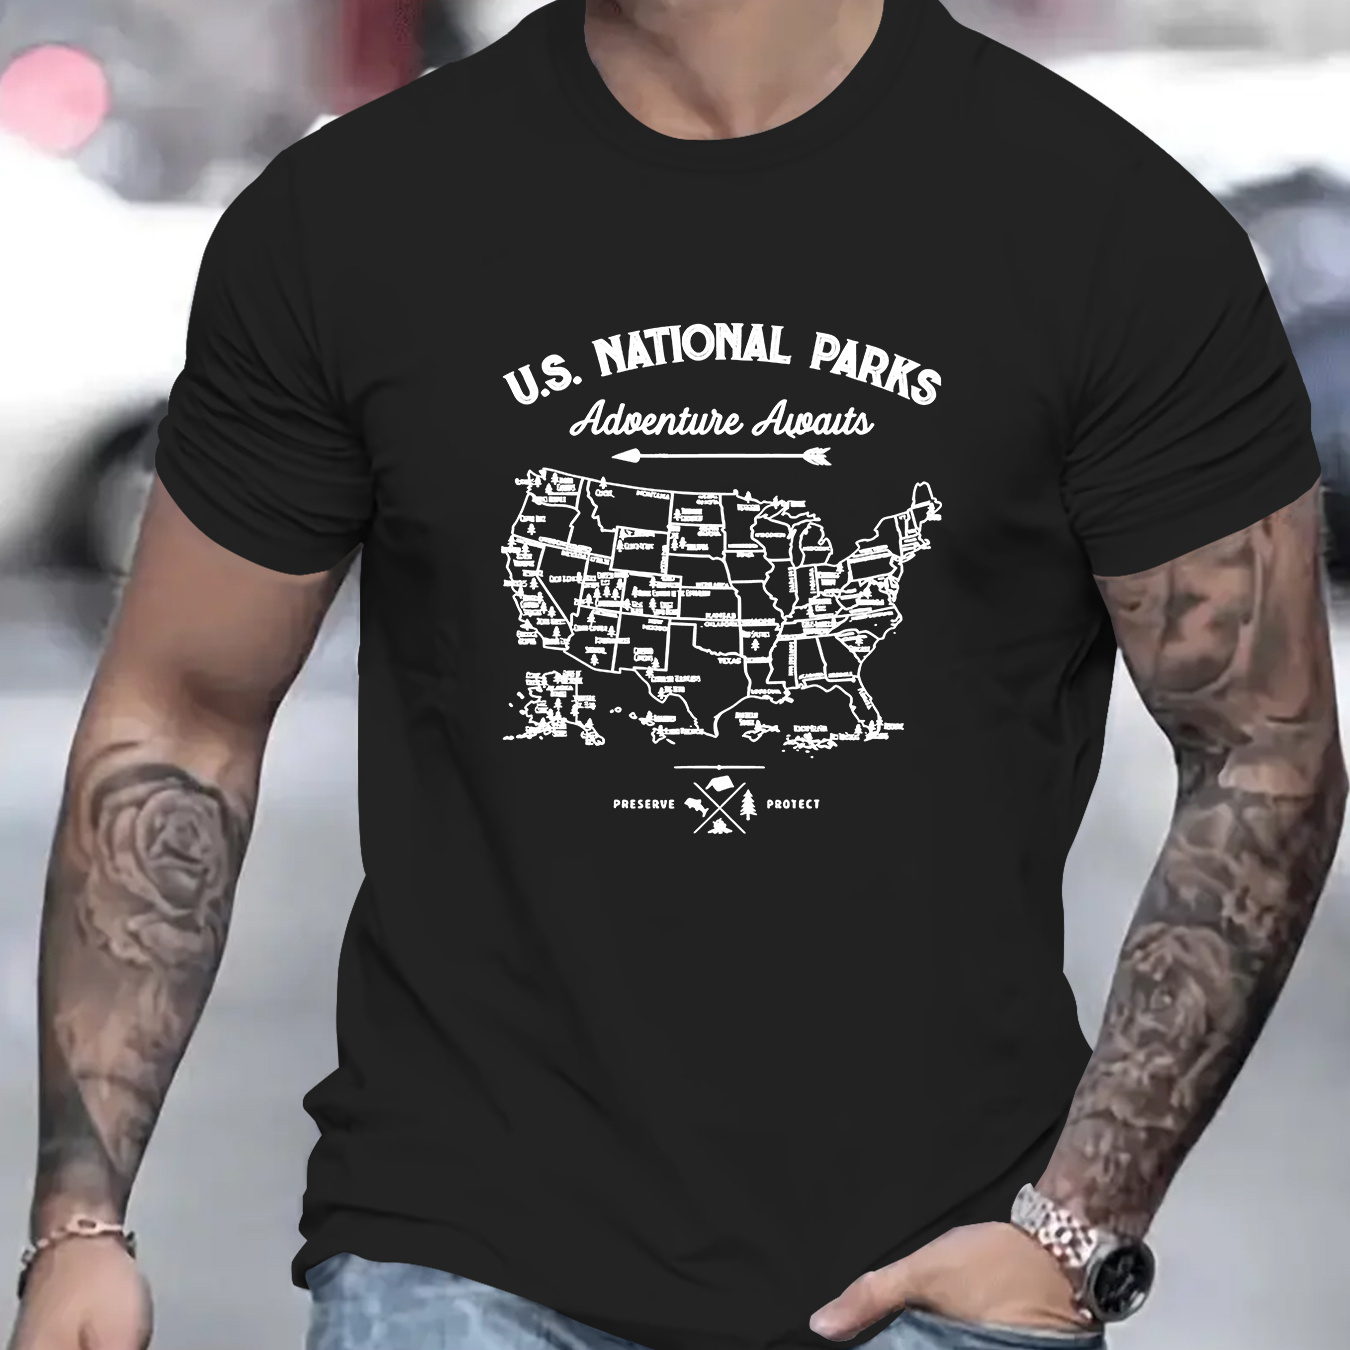 

Men's Casual Short-sleeve T-shirt, Spring And Summer " Us. National Parks "print Top, Comfortable Round Neck Tee, Regular Fit, Versatile Fashion For Everyday Wear